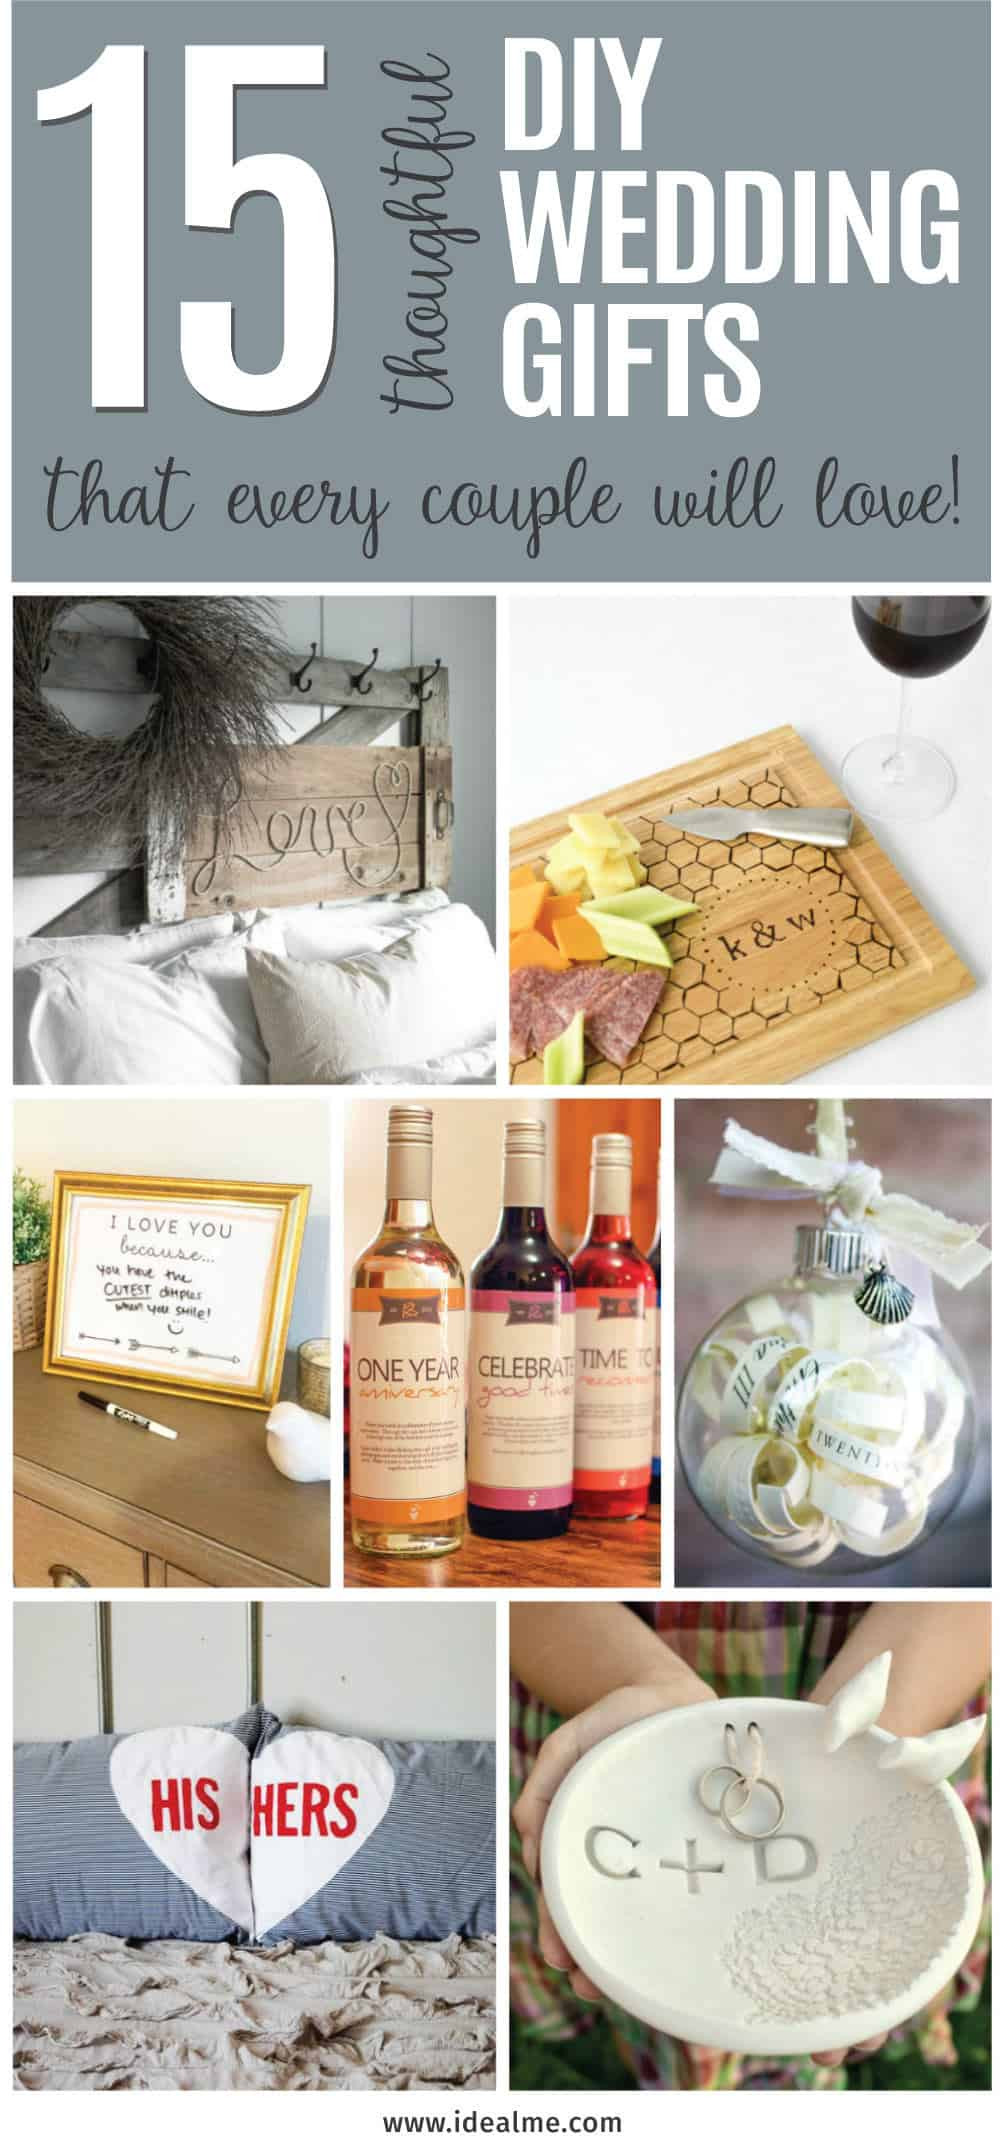 Homemade Wedding Gifts
 15 Thoughtful DIY Wedding Gifts that Every Couple Will